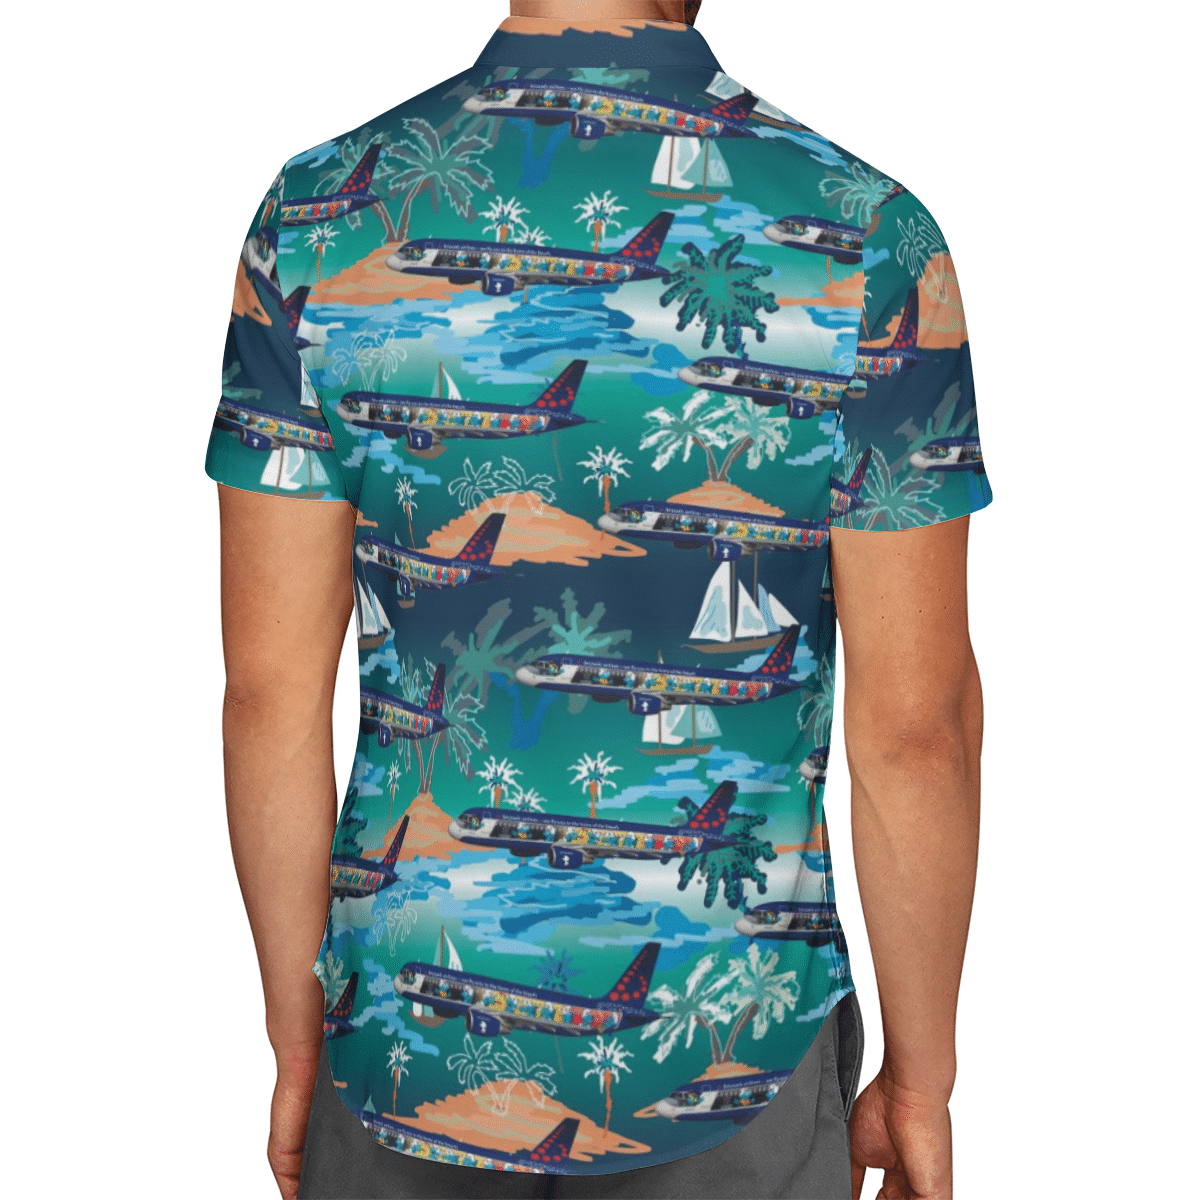 Going to the beach with a quality shirt 35